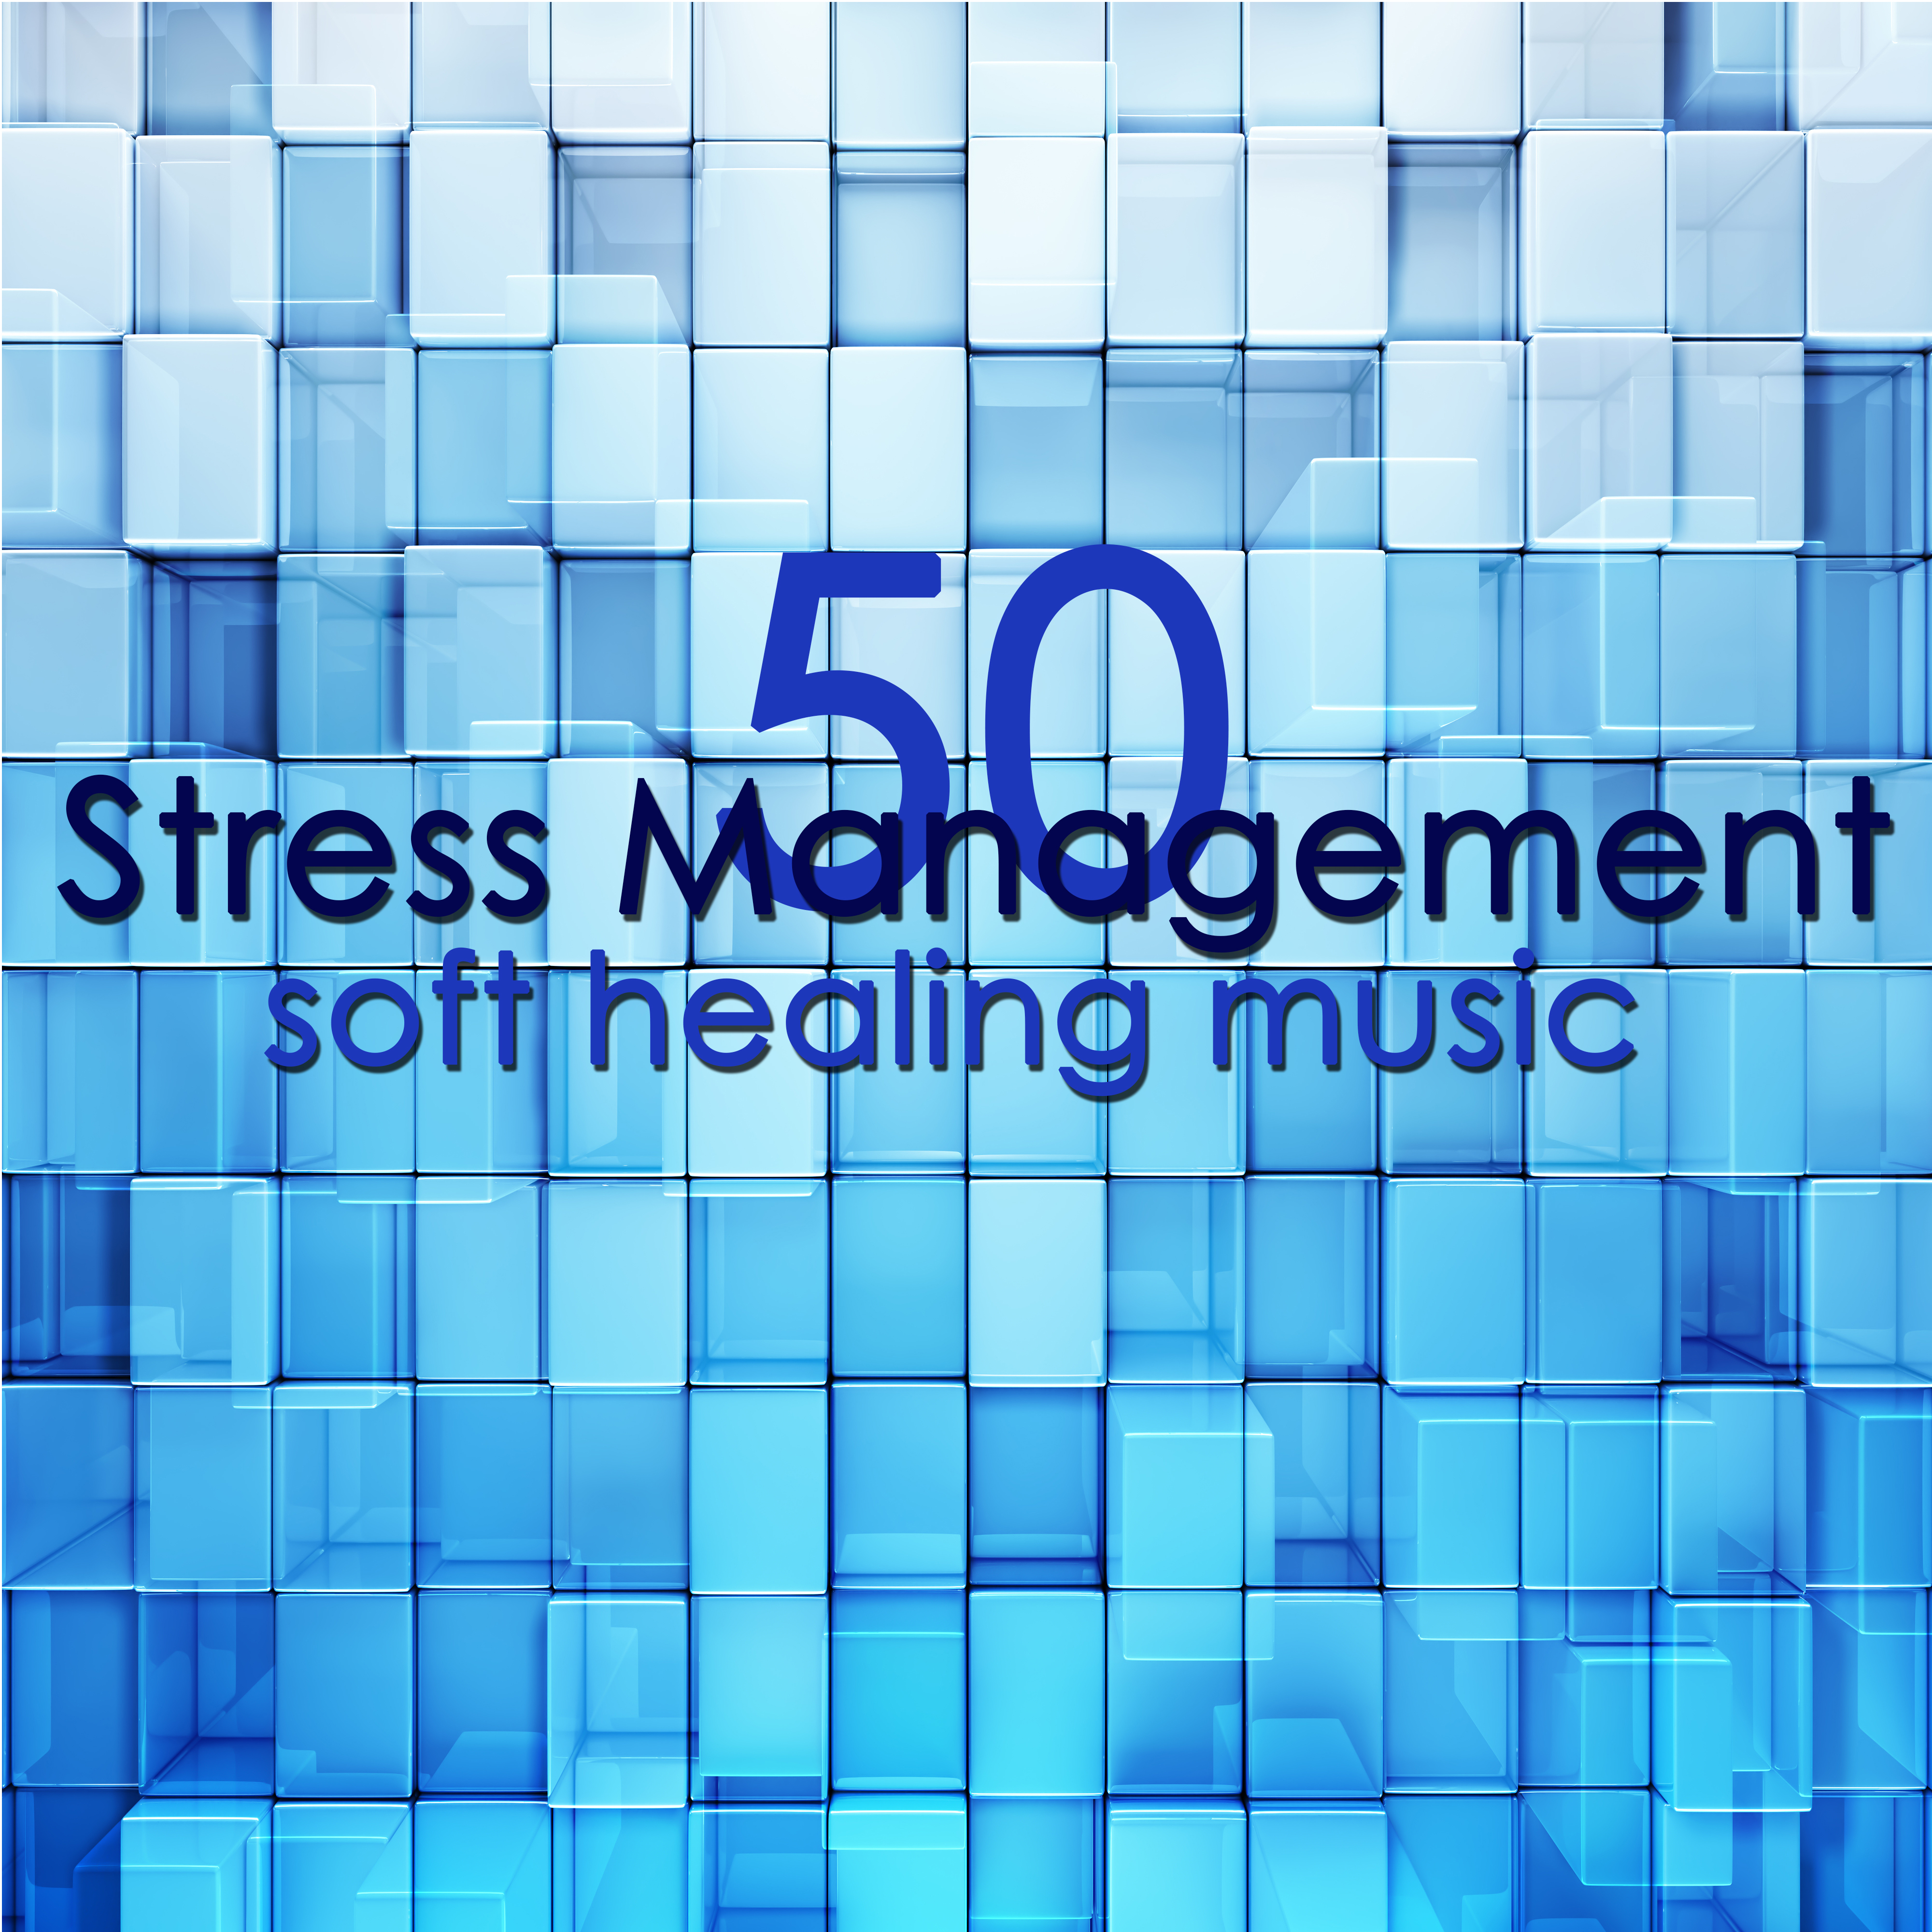 Stress Management Soft Healing Music  50 Instrumental Songs to Reduce Anxiety  Find Ways to Relax